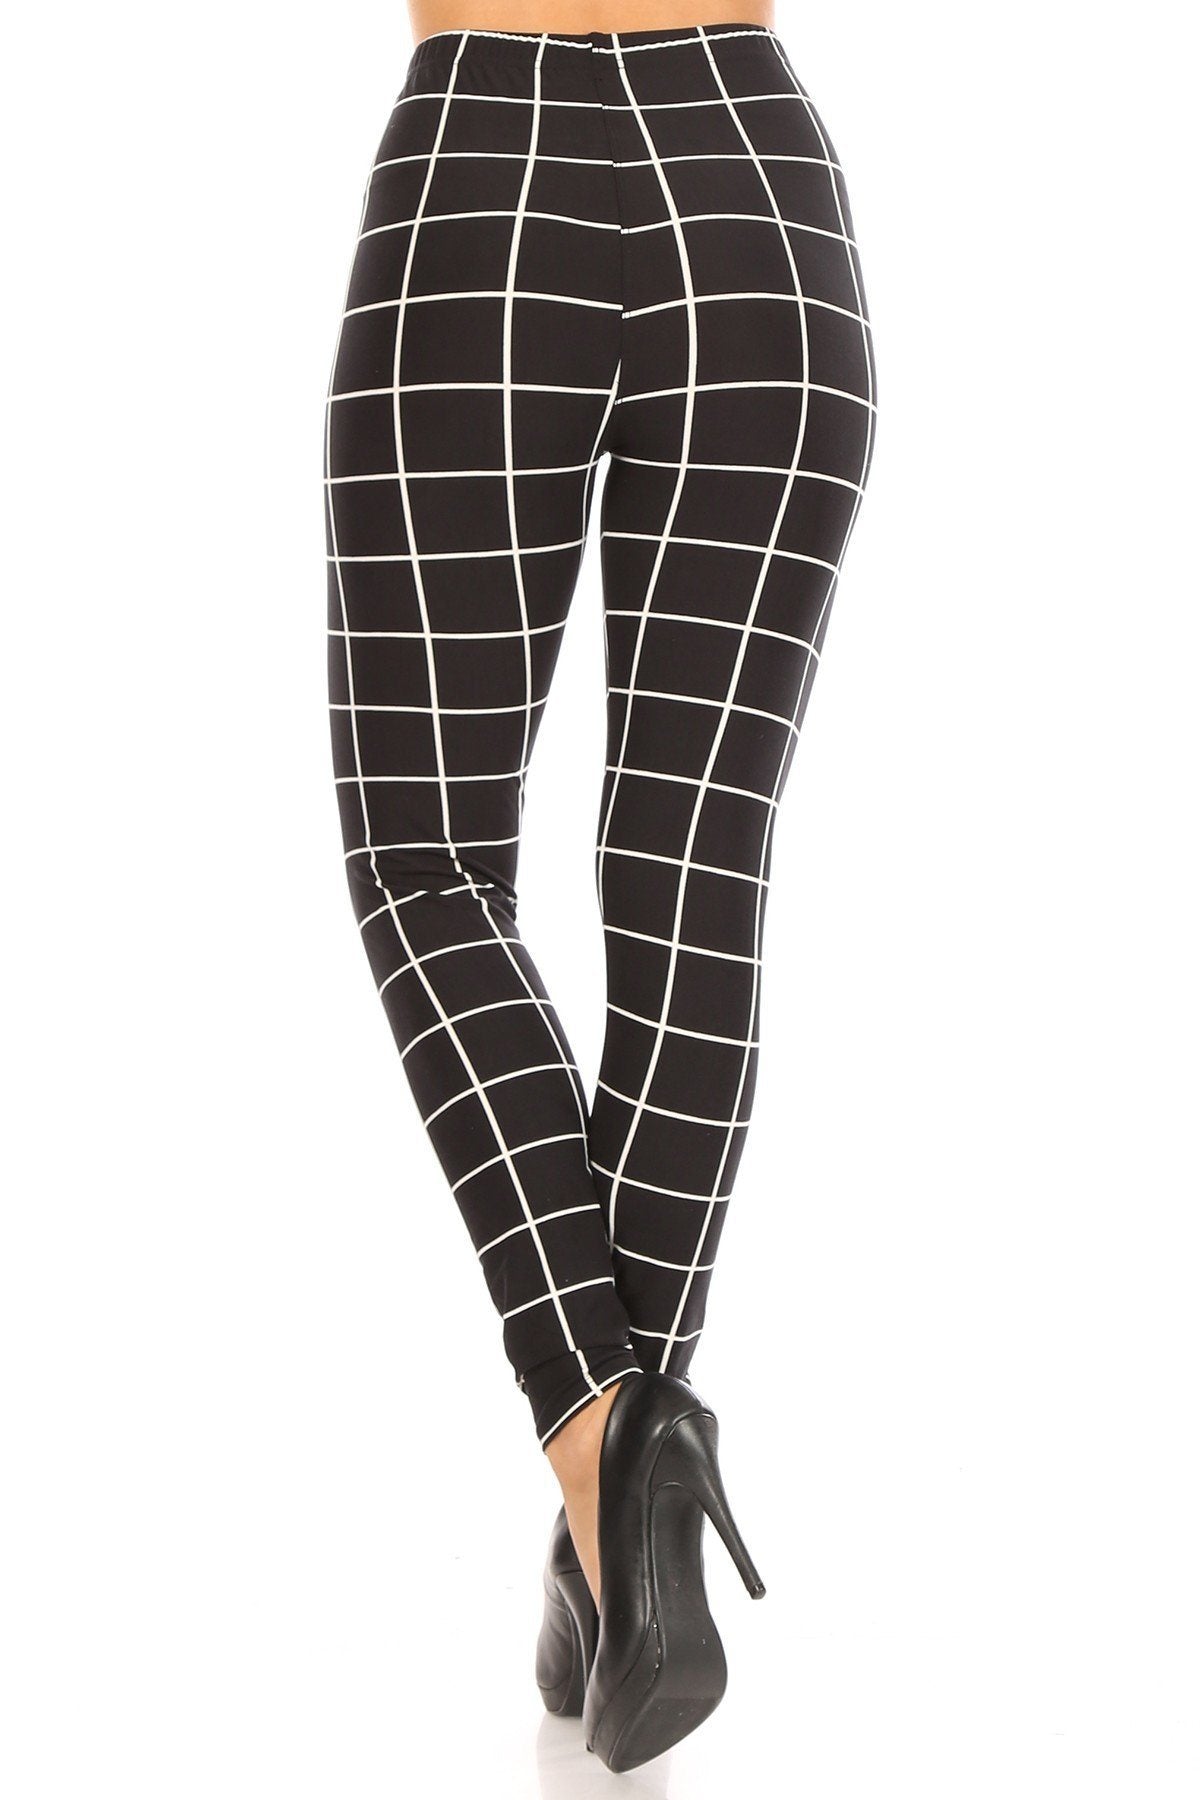 Plaid High Waisted Leggings With Elastic Waist And Skinny Fit - Fashion Quality Boutik